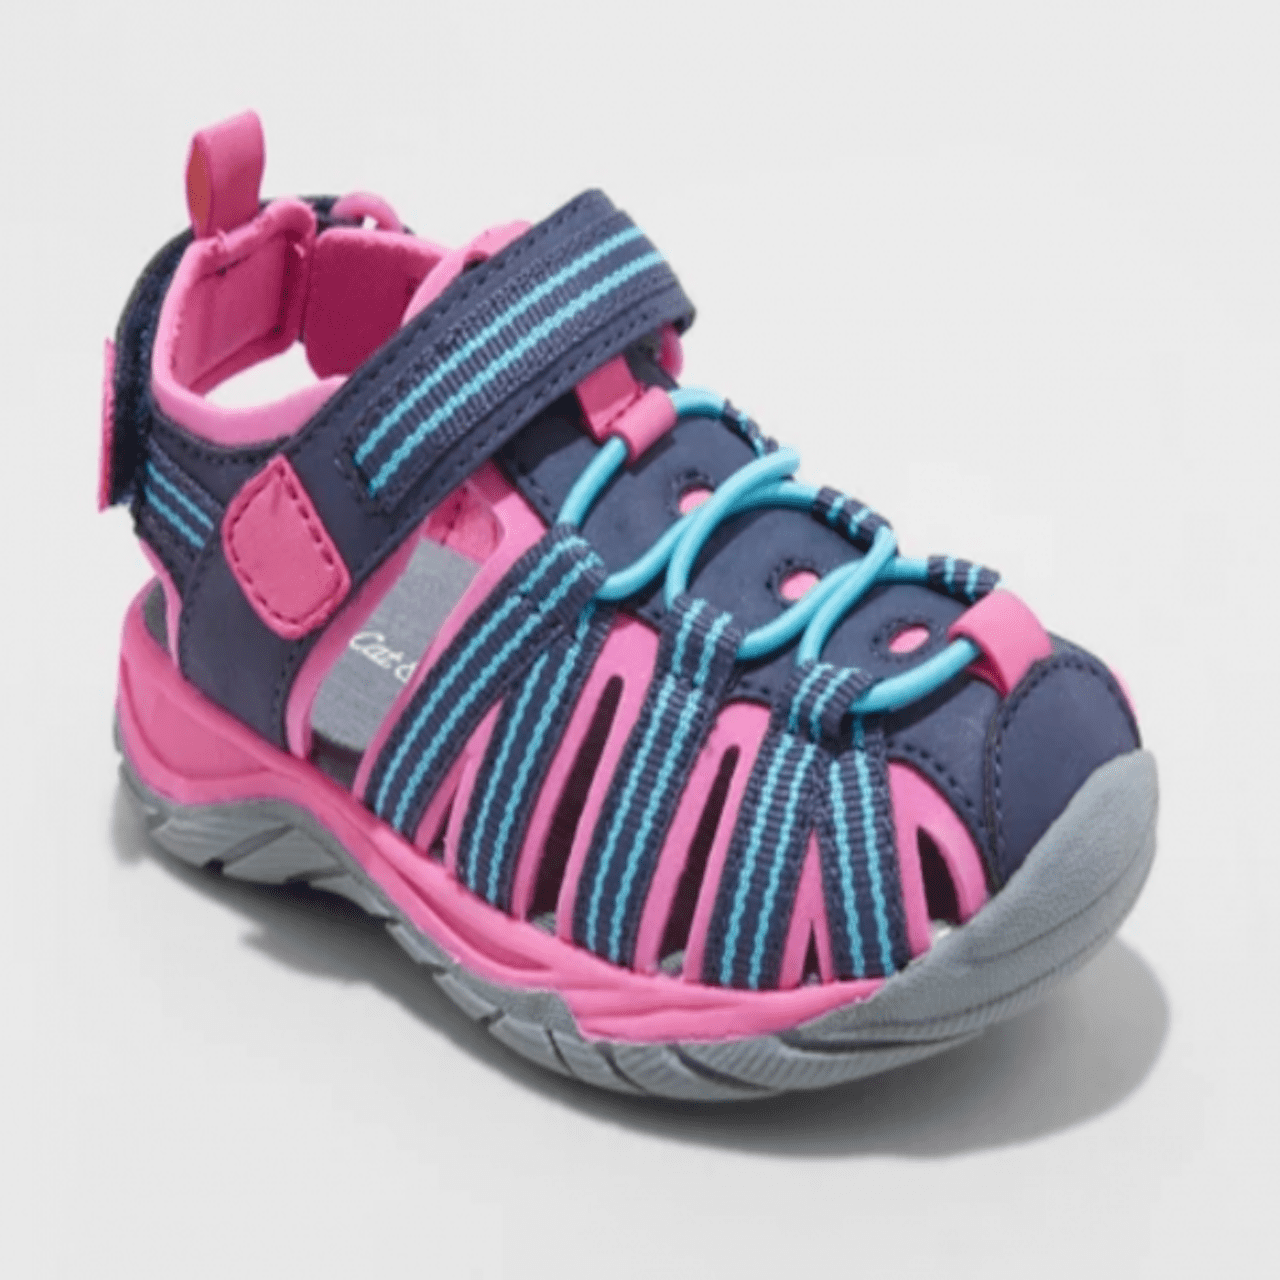 Toddler Girls' Rory Camp Hiking Sandals 